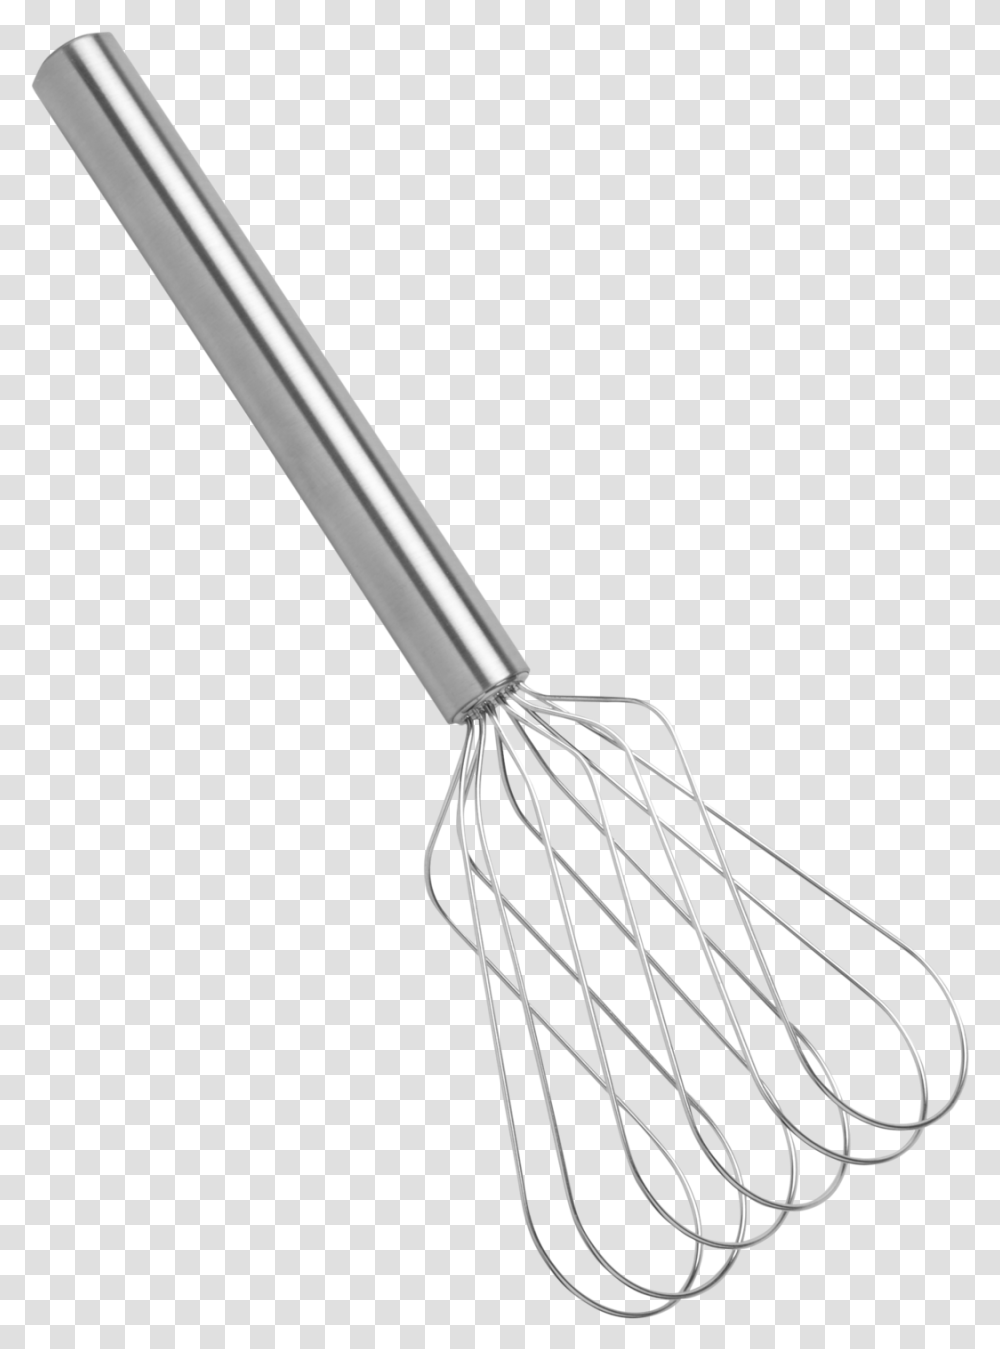 Christopher Kimball For Kuhn Rikon Traverse Power Whisk Kitchen Tools, Appliance, Mixer, Blender Transparent Png